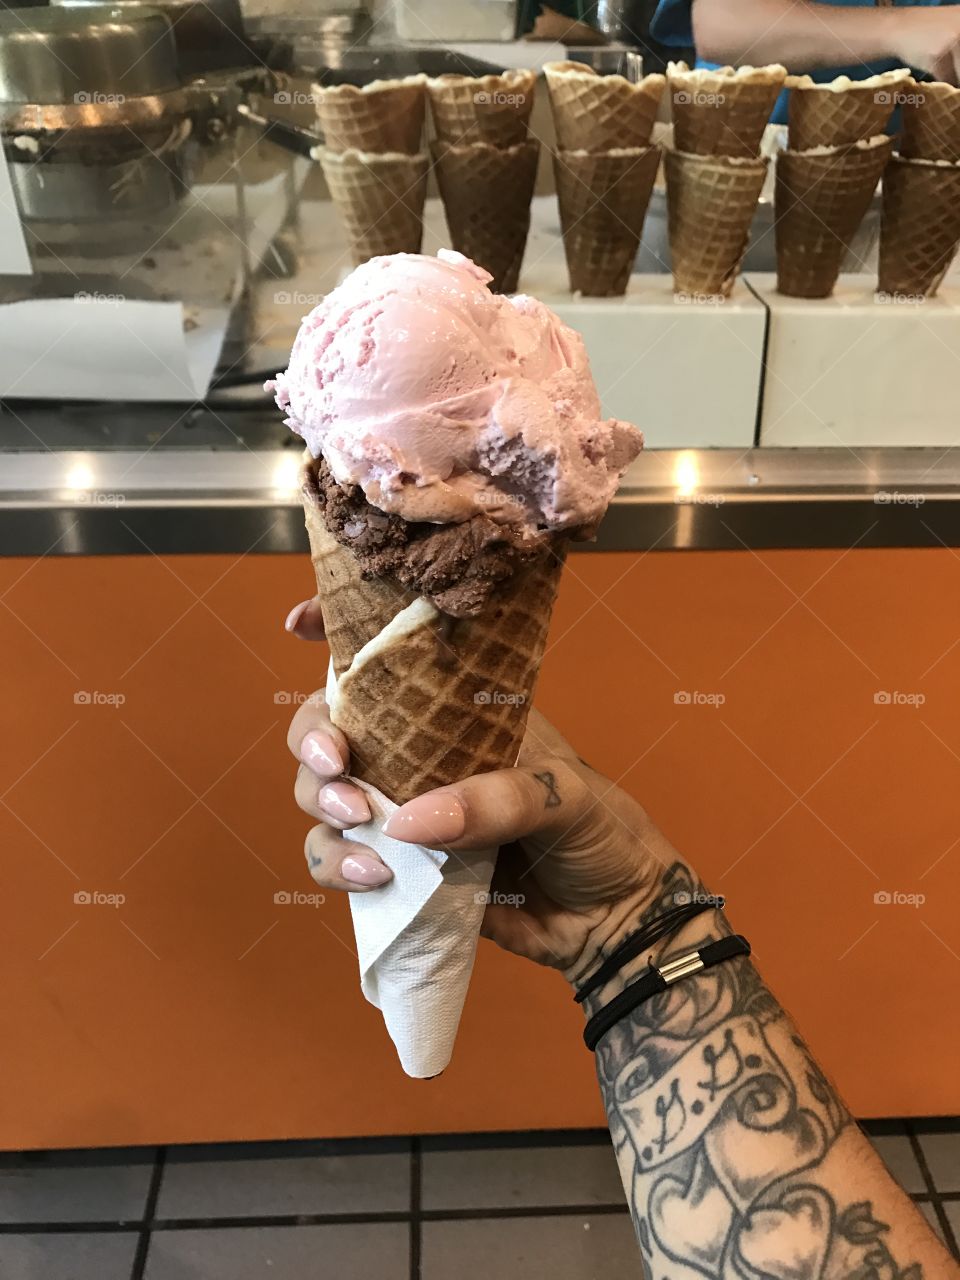 Giant helping of beautiful ice cream! Strawberry and chocolate in a waffle cone! 